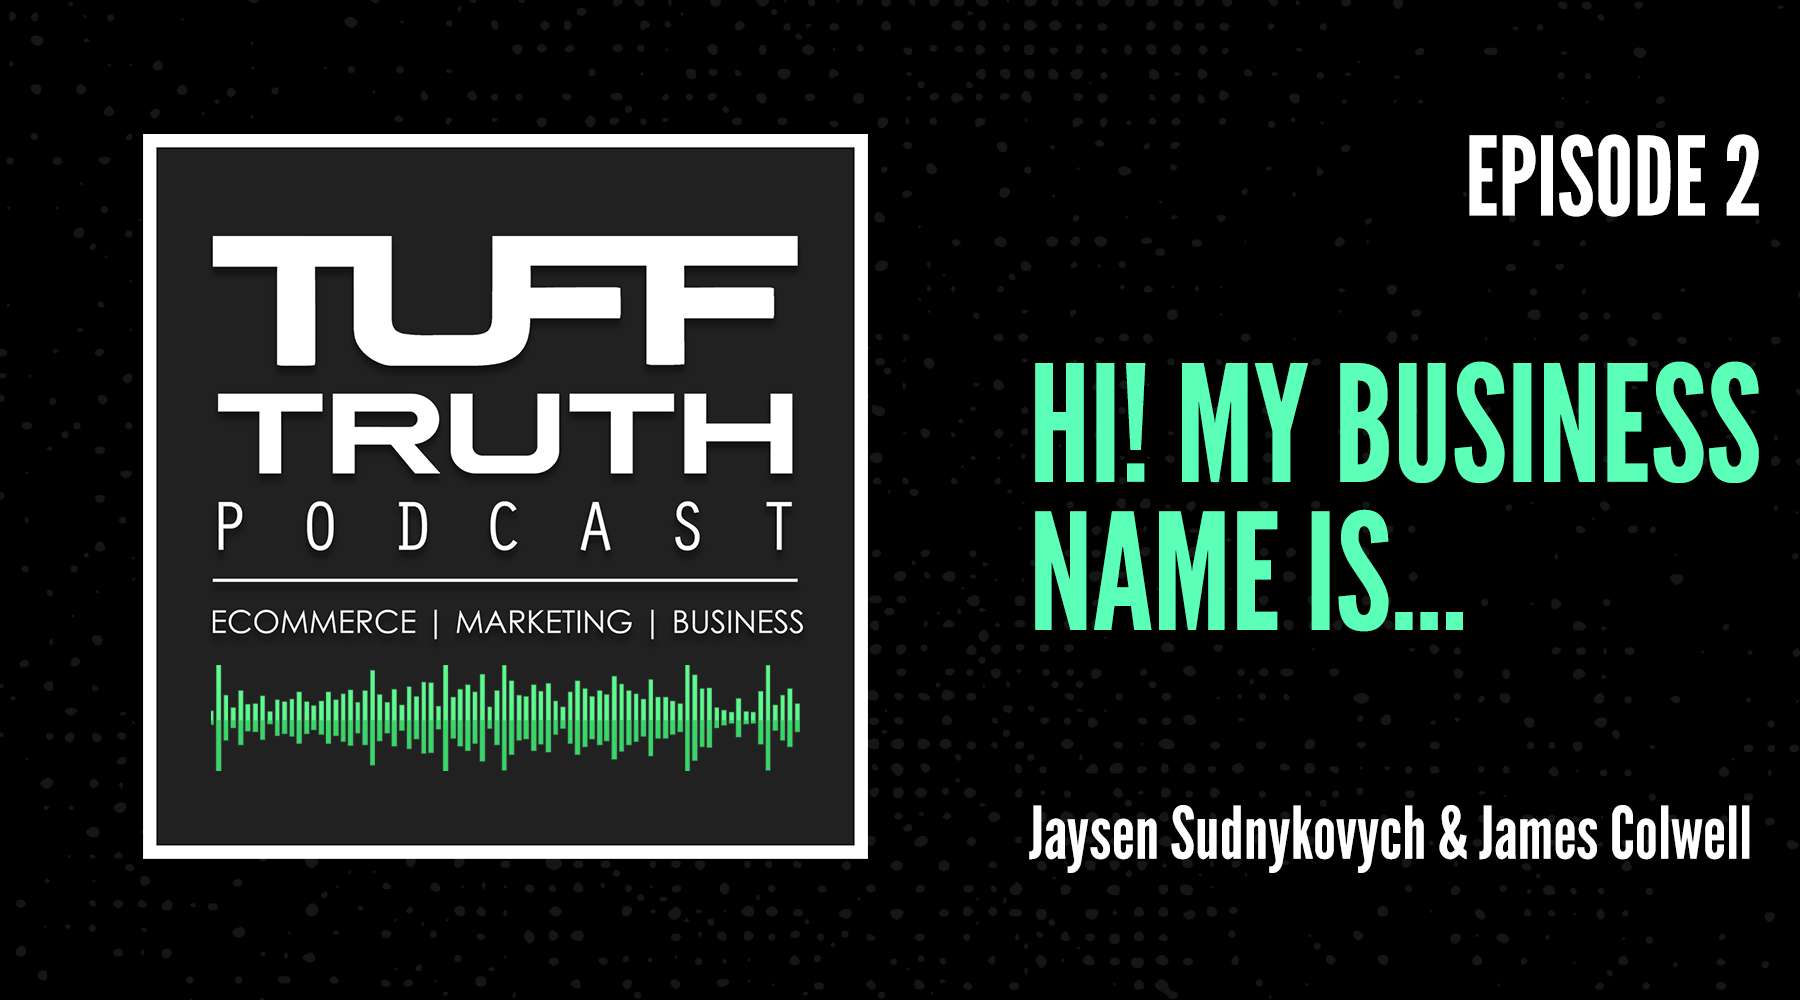 Episode 2: Hi! My business name is  - The TUFF Truth Podcast